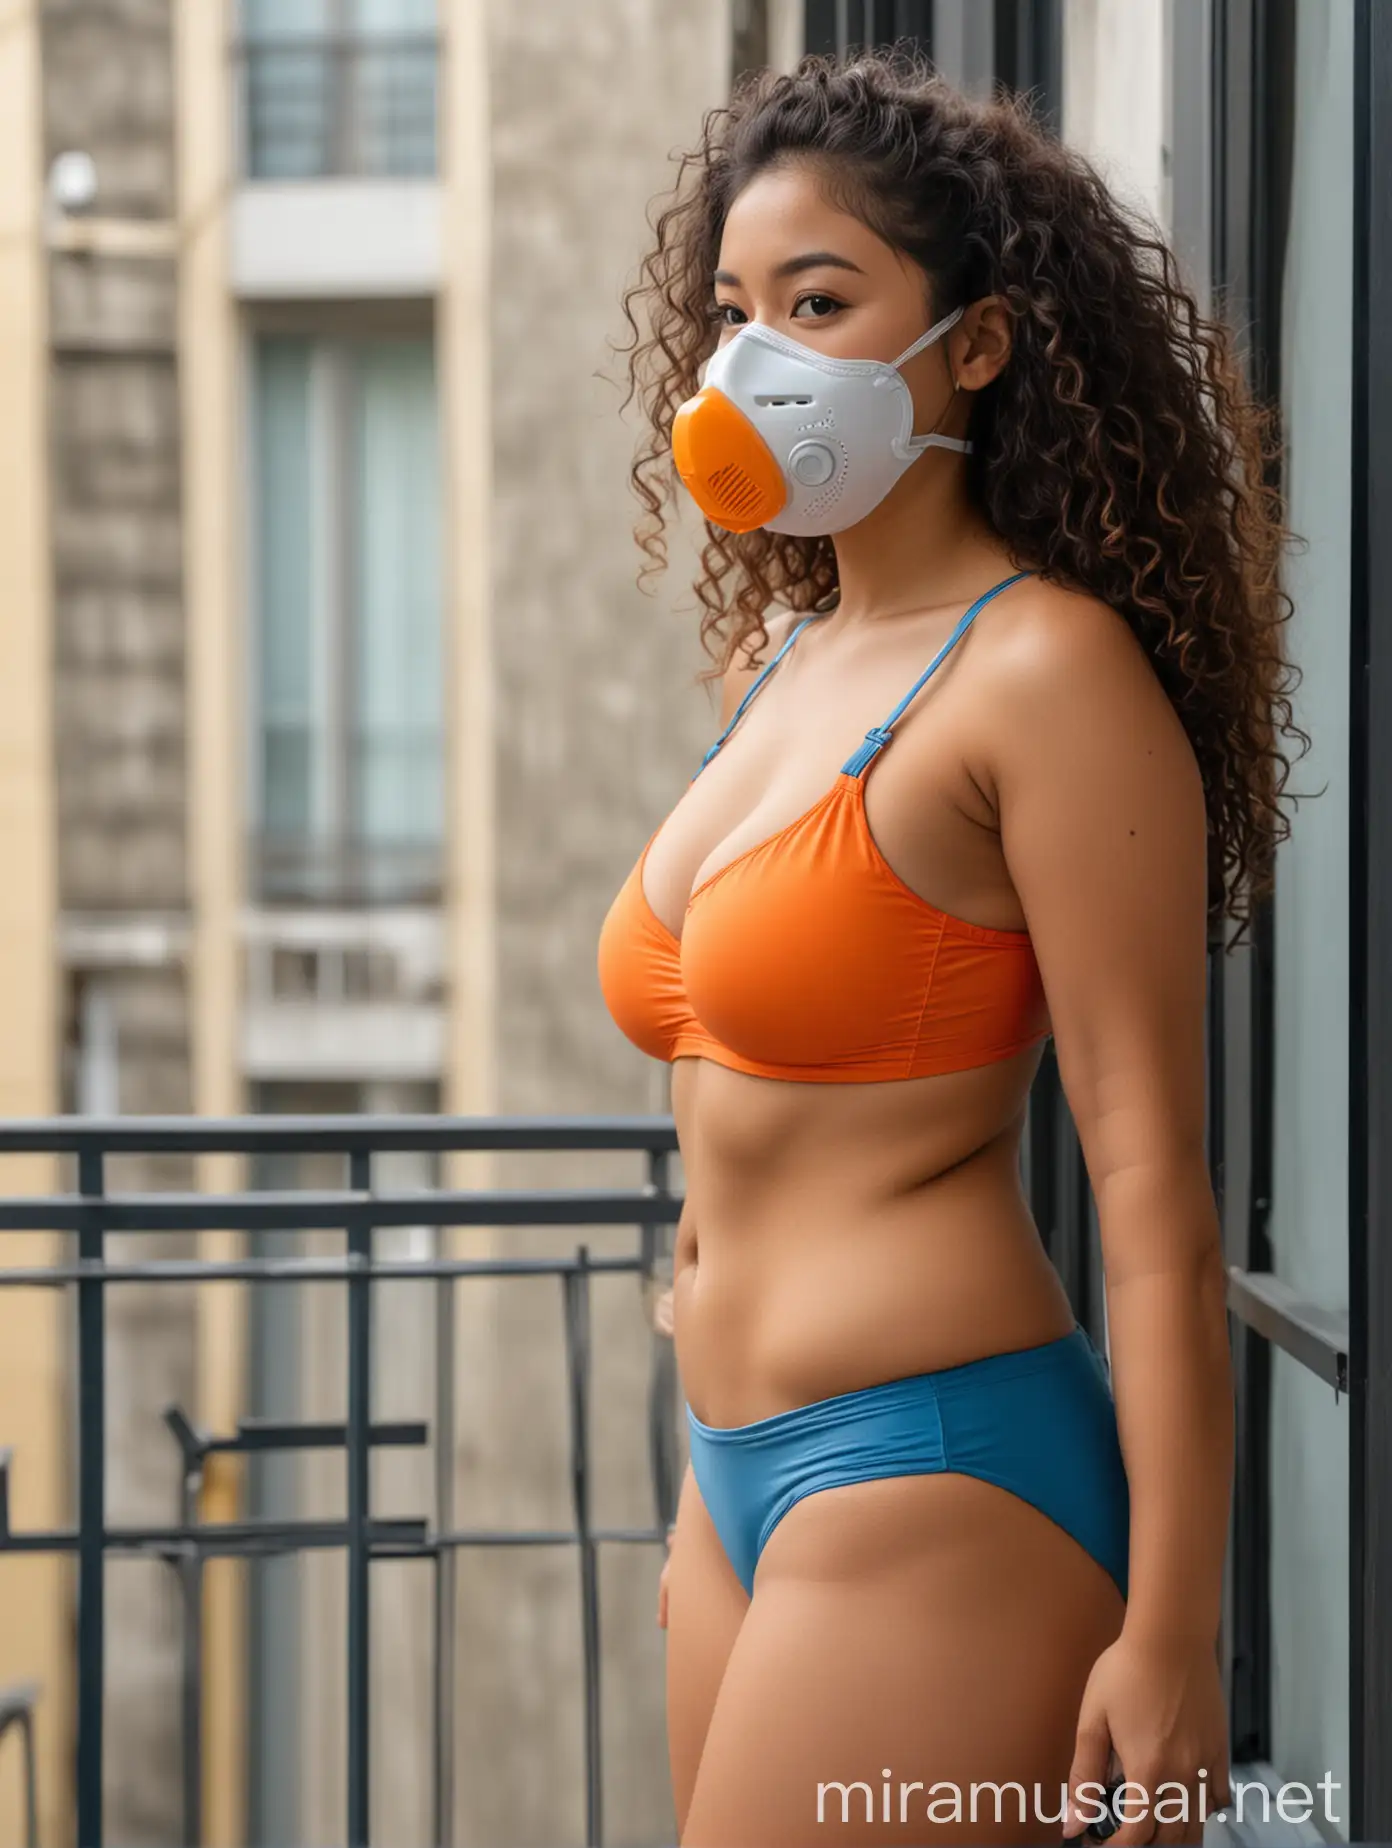 side view, an attractive, busty, bodacious, cute butt, college-aged curly haired filipino woman, in a respirator mask, flirtatiously standing on a balcony, in a blue padded sports bra, and orange french cut bikini bottoms